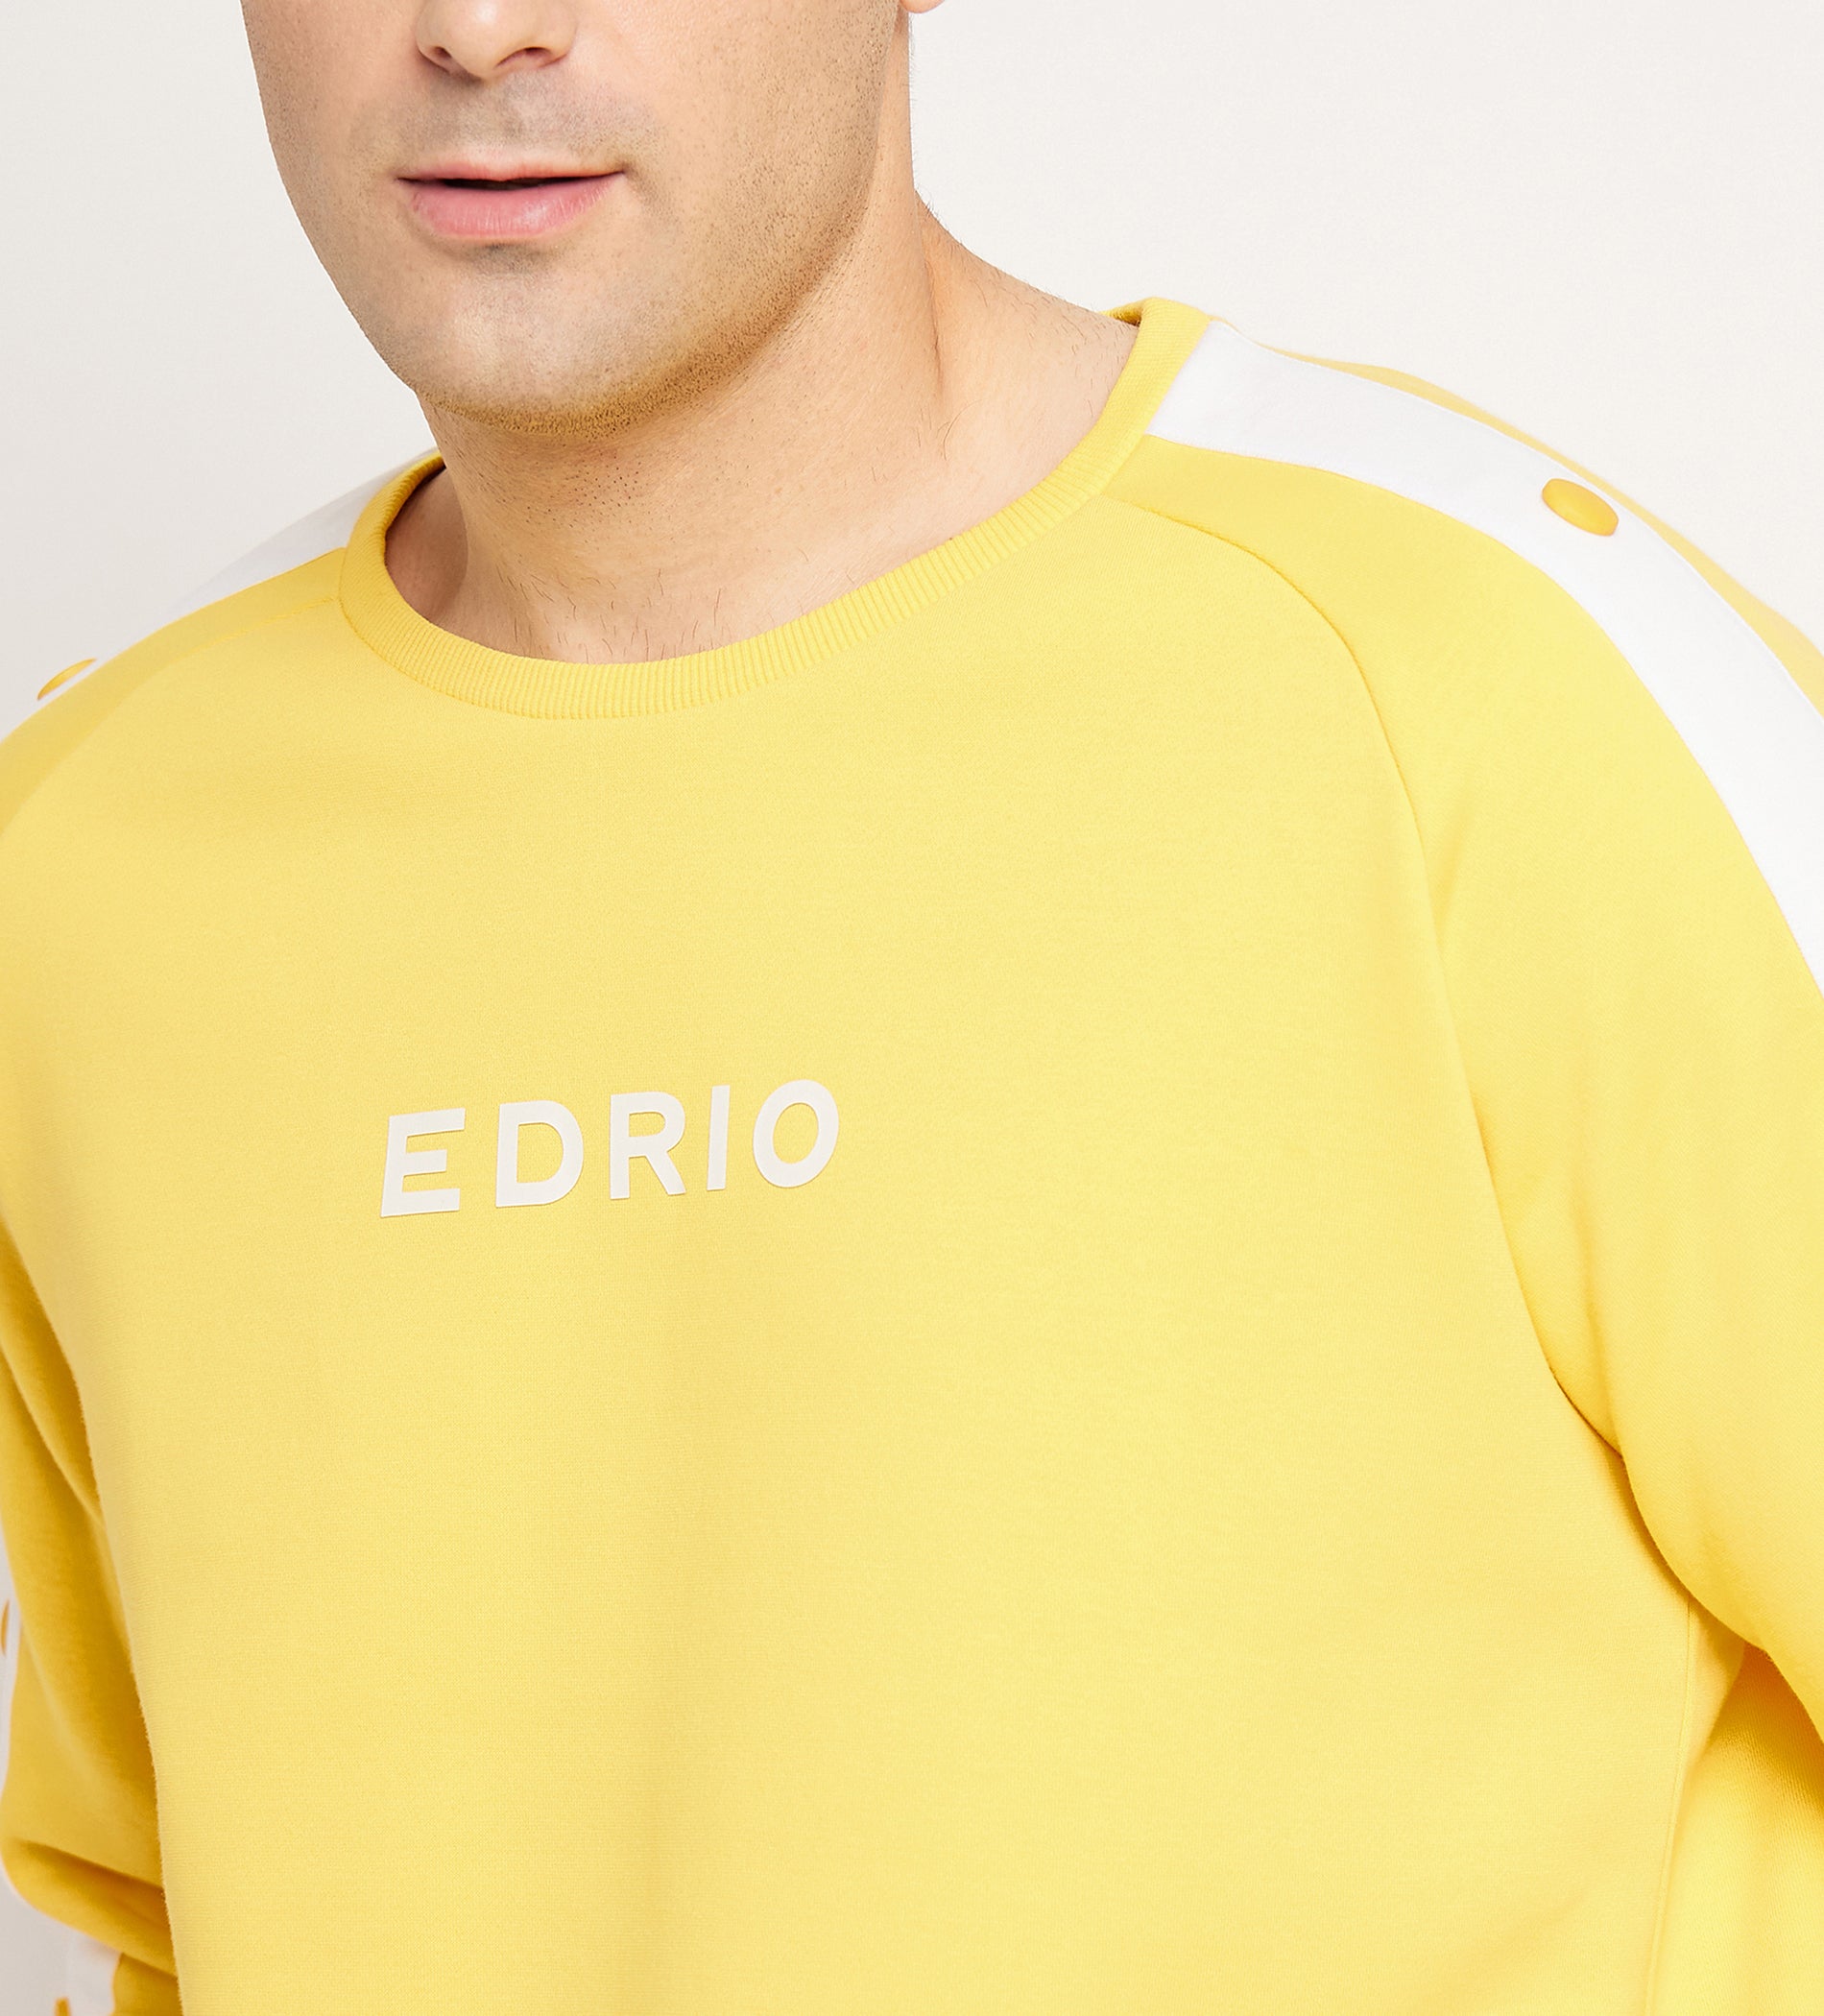 Radiant Yellow Sweatshirt with Snap Button Sleeve Accents